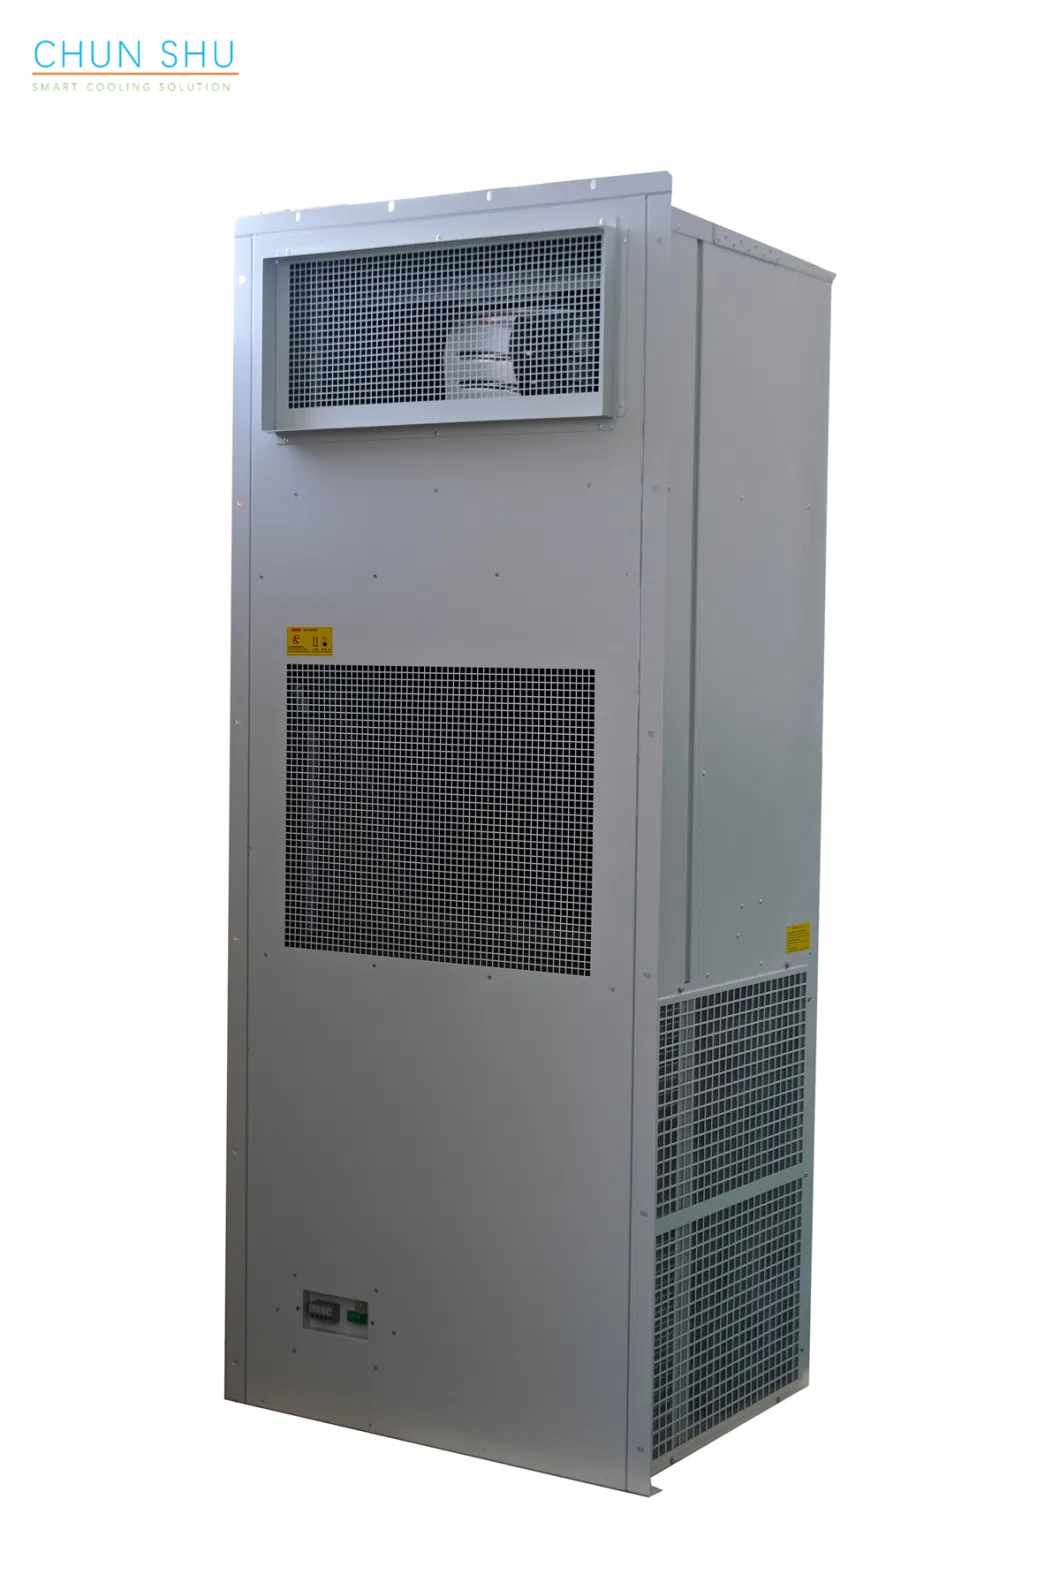 15kw Wall Mounted Integrated Air Cooling Unit Air Conditioner for Energy Storage System